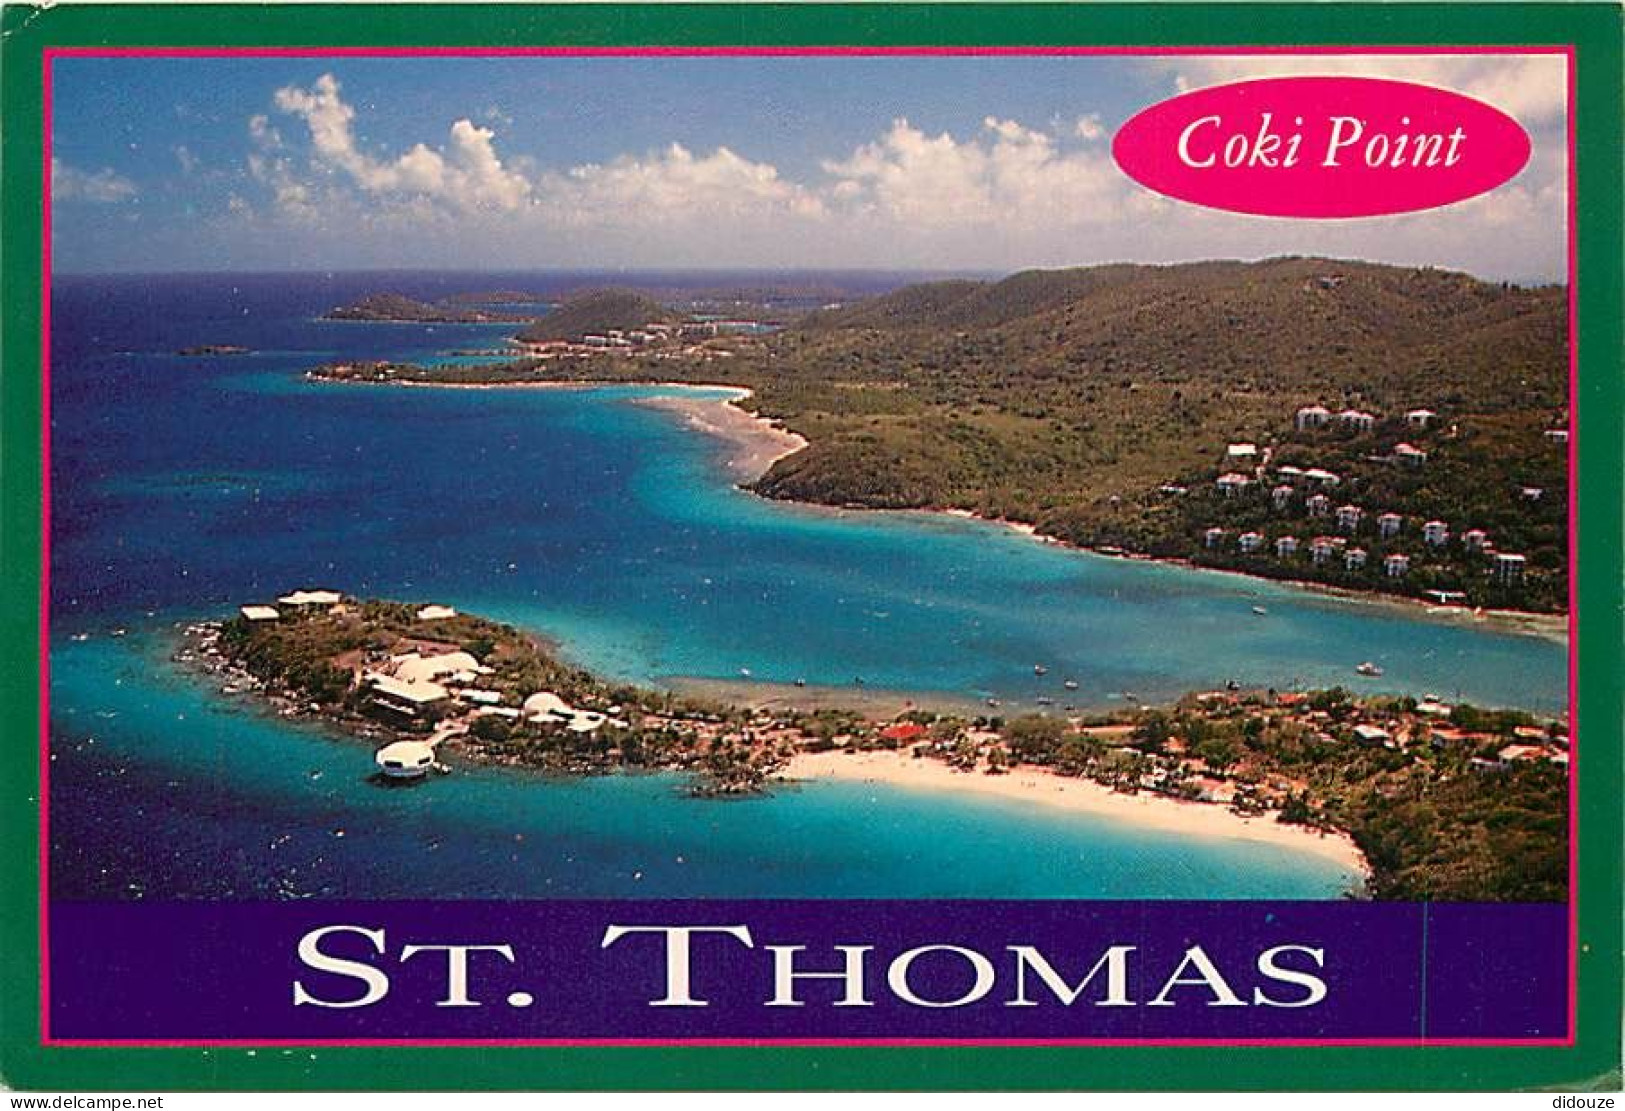 Antilles - Iles Vierges Américaines - U S Virgin Islands - St Thomas - Coki Point Beach And The Coral World Undenwater O - Isole Vergini Americane